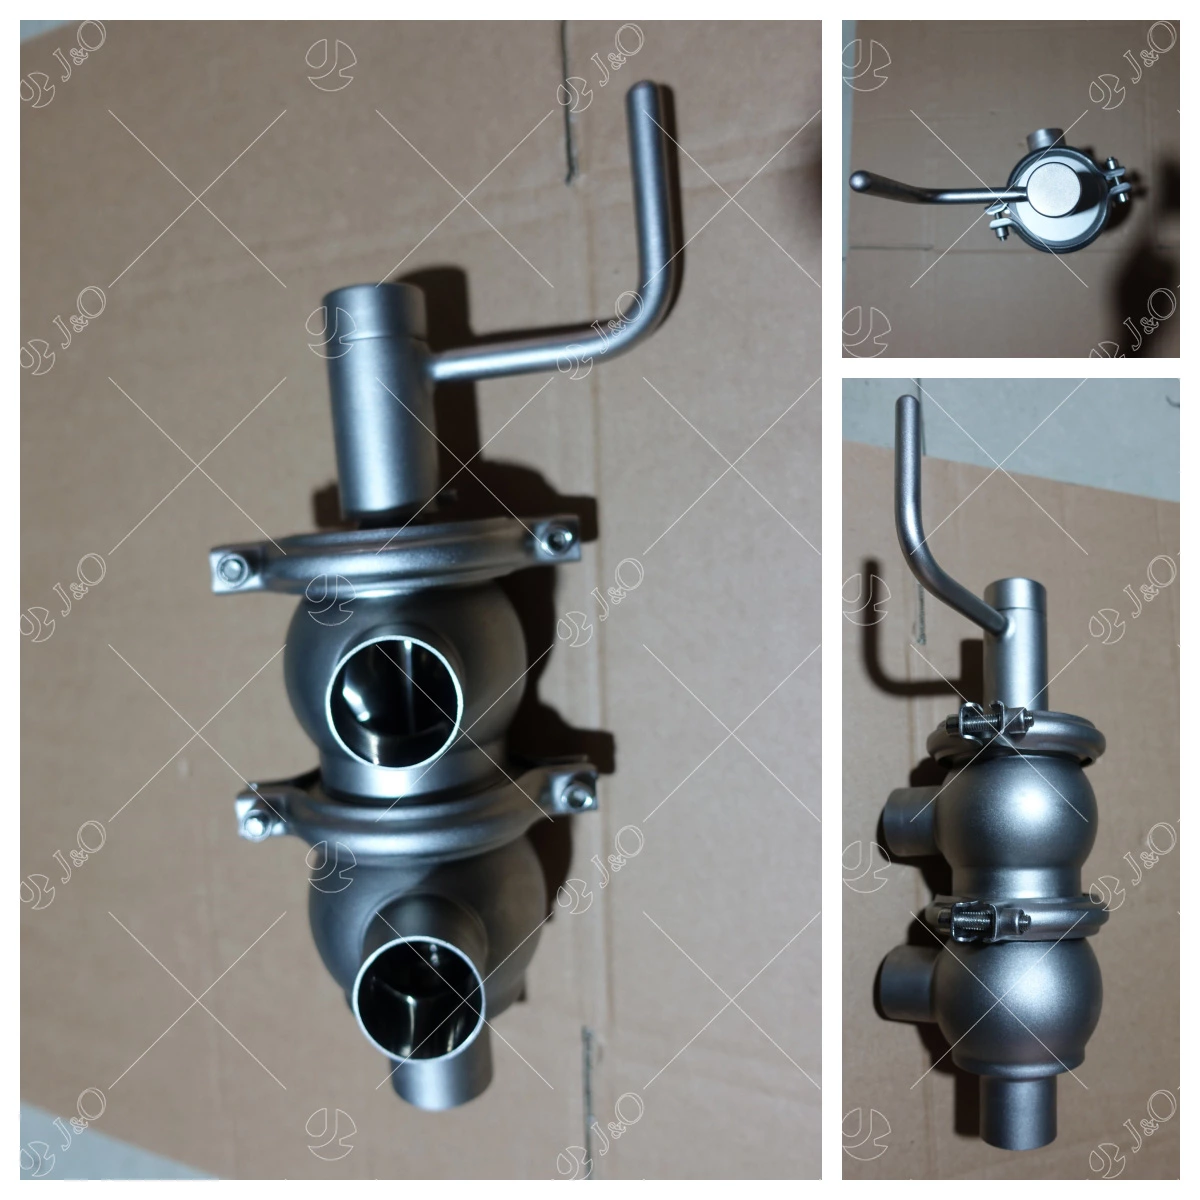 Stainless Steel Sanitary TL Type Manual Clamp Divert Valve